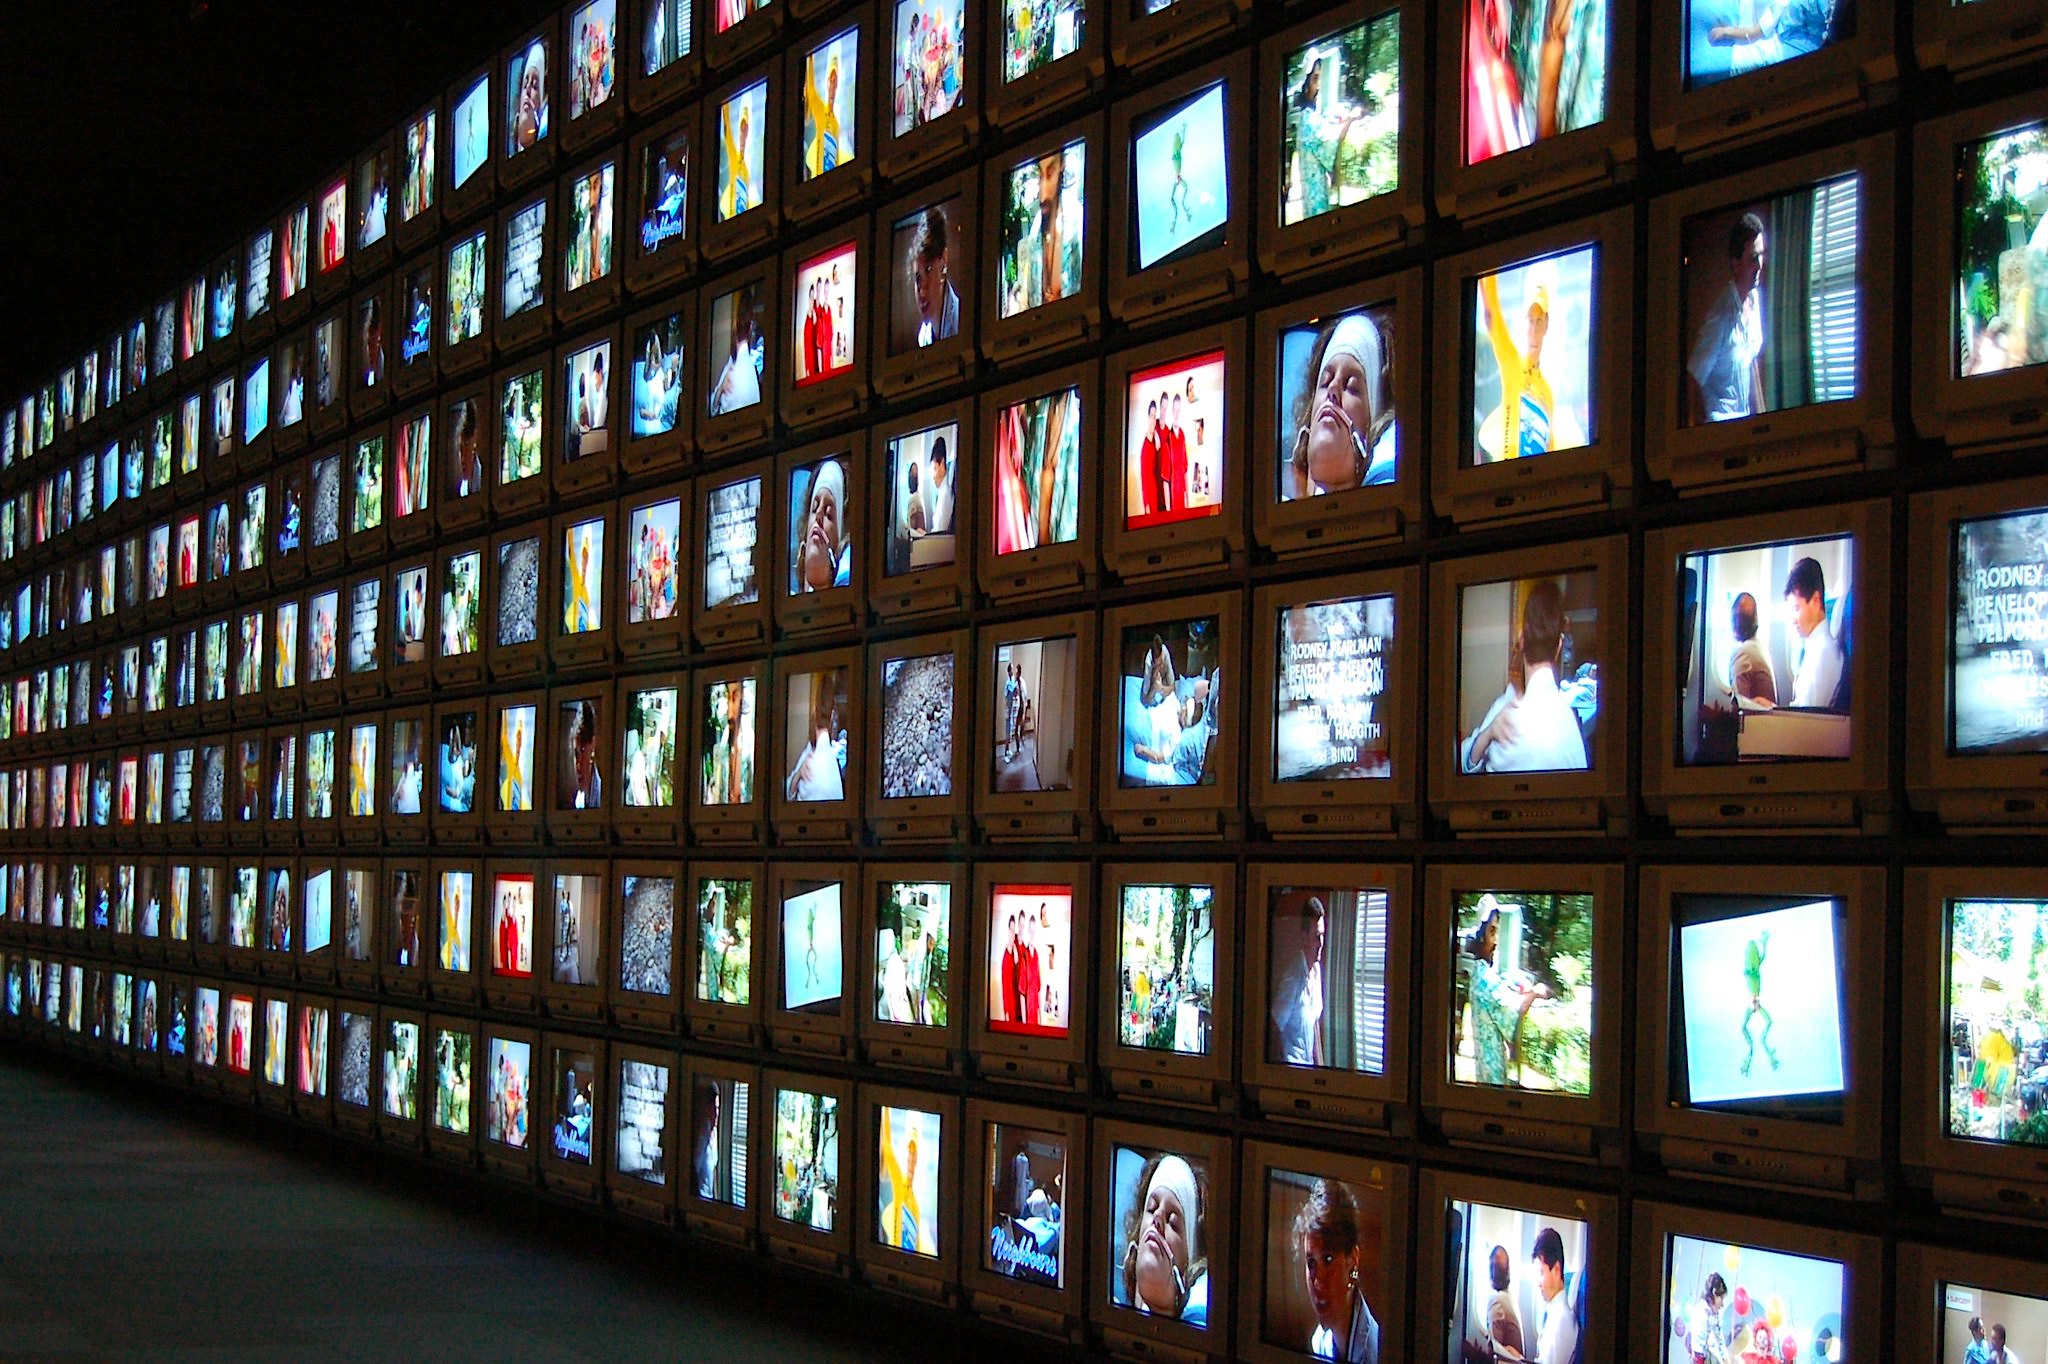 Video more tv. Big Media. Many TVS. The Television industry.